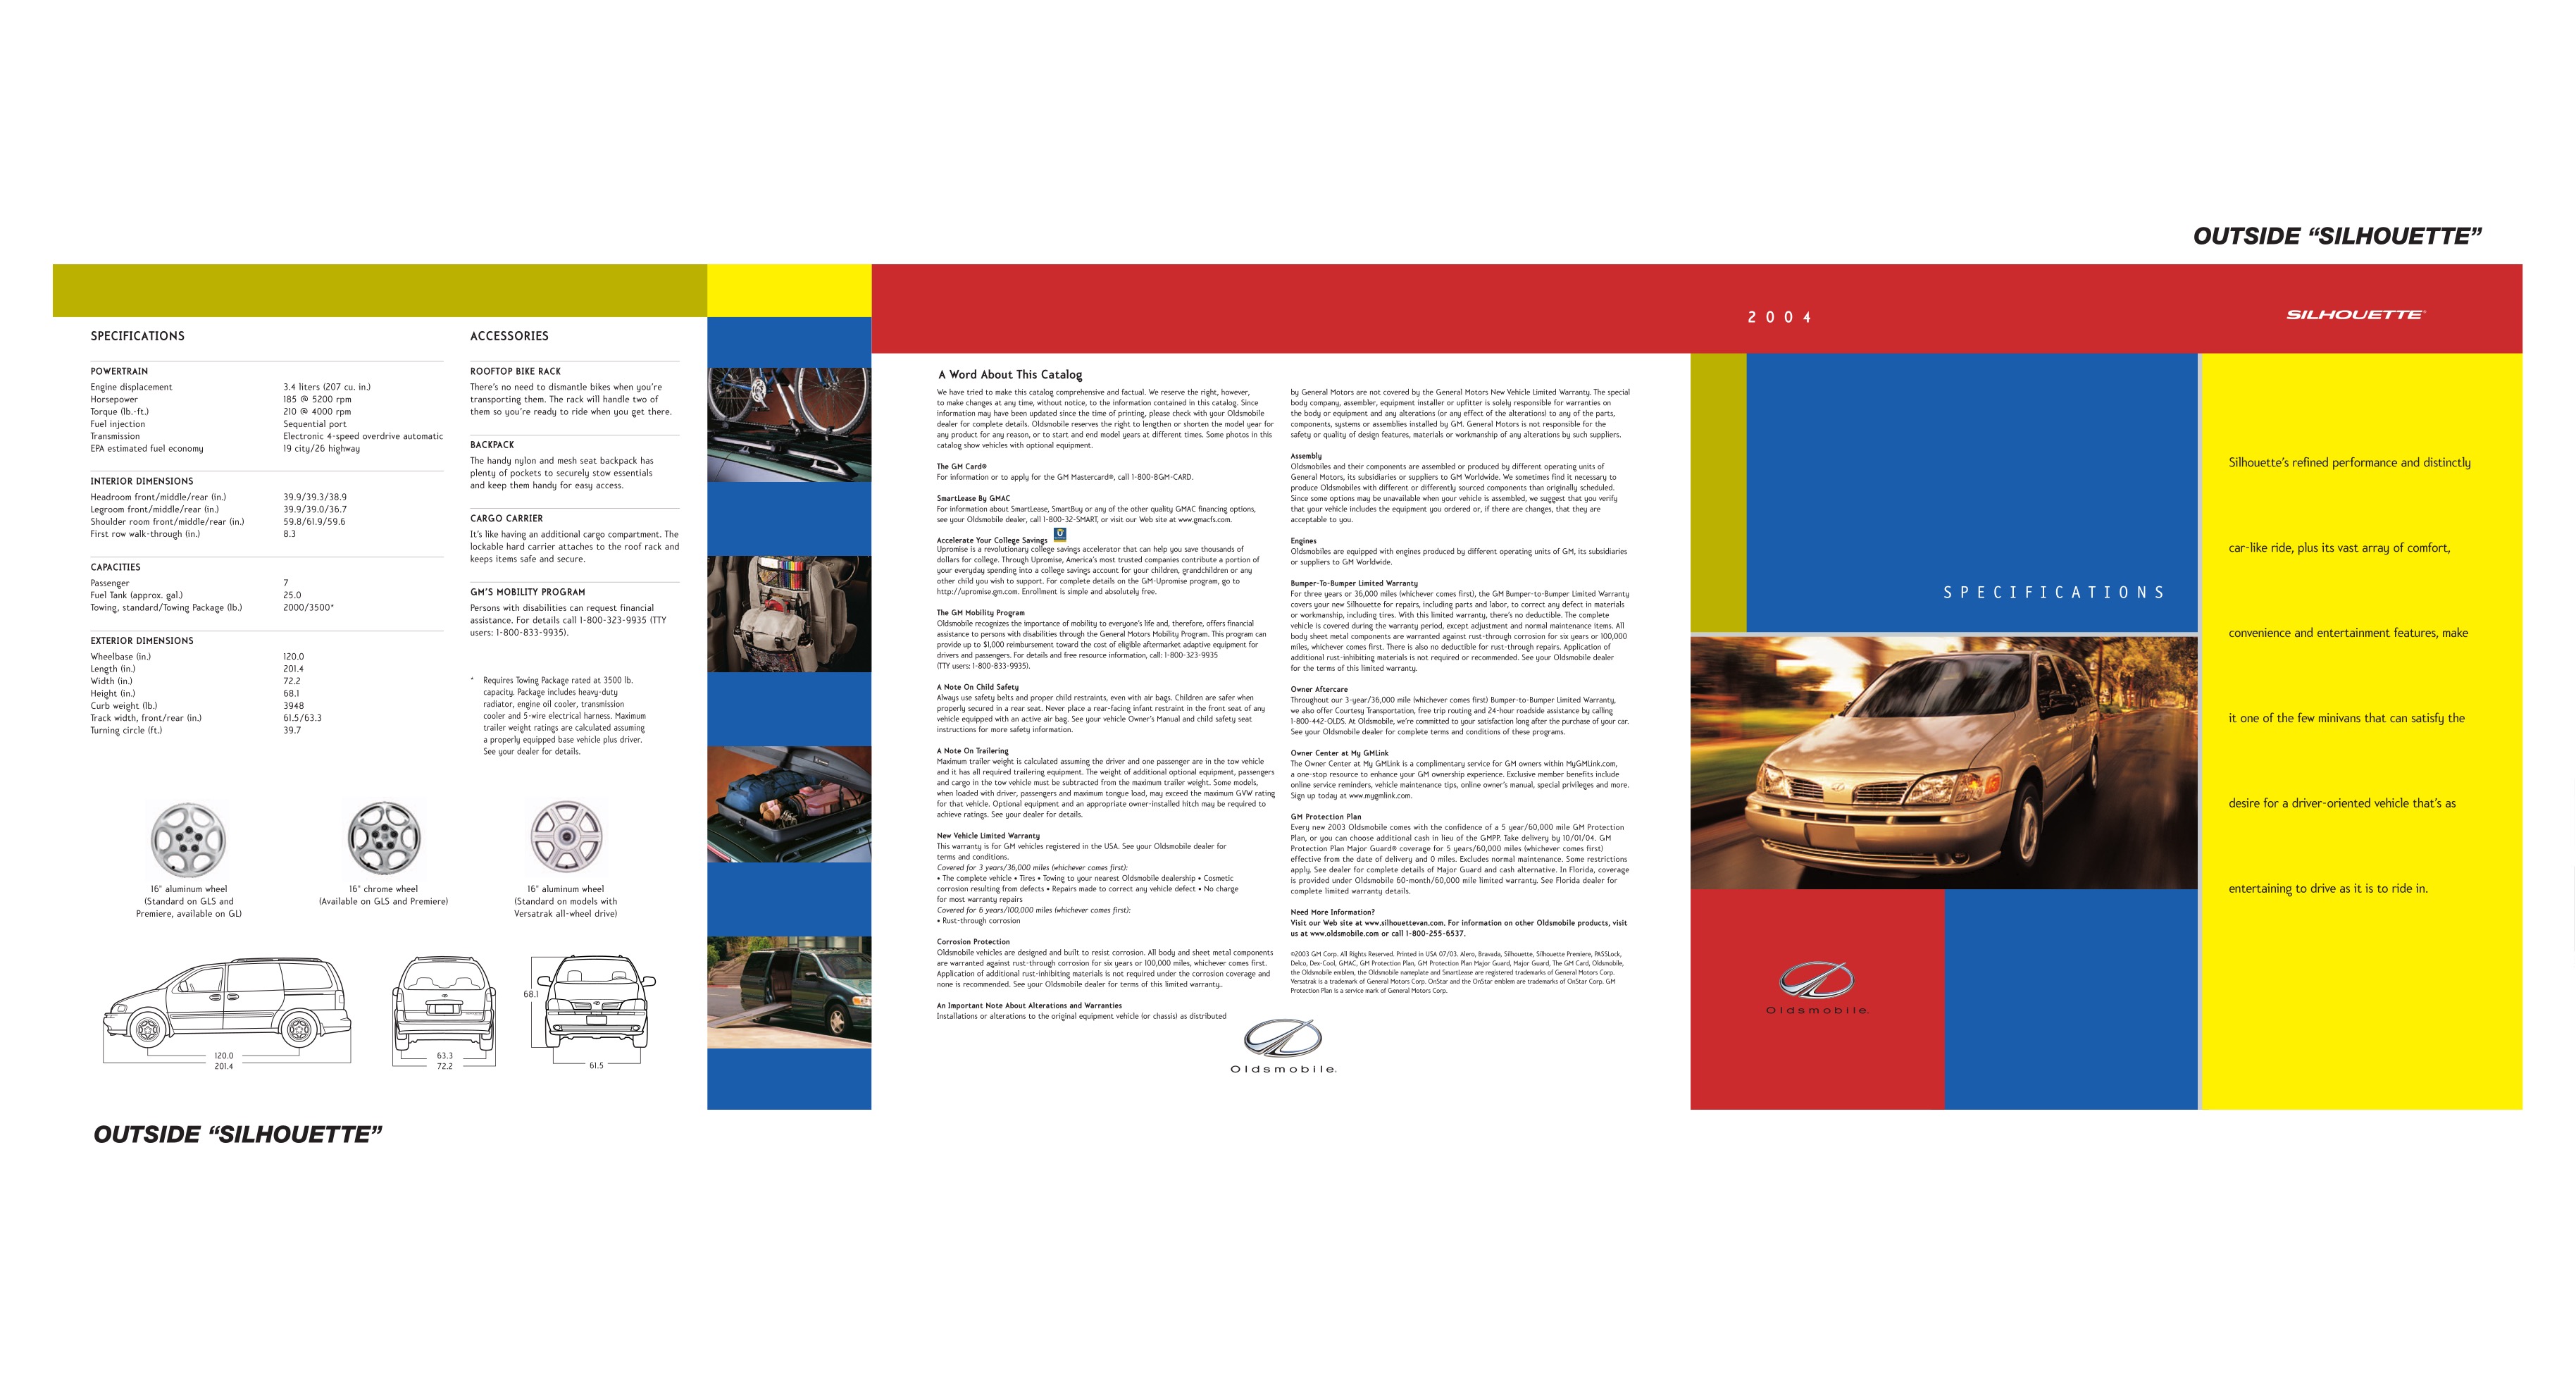 2004 Oldsmobile Silhouette Brochure Page 2